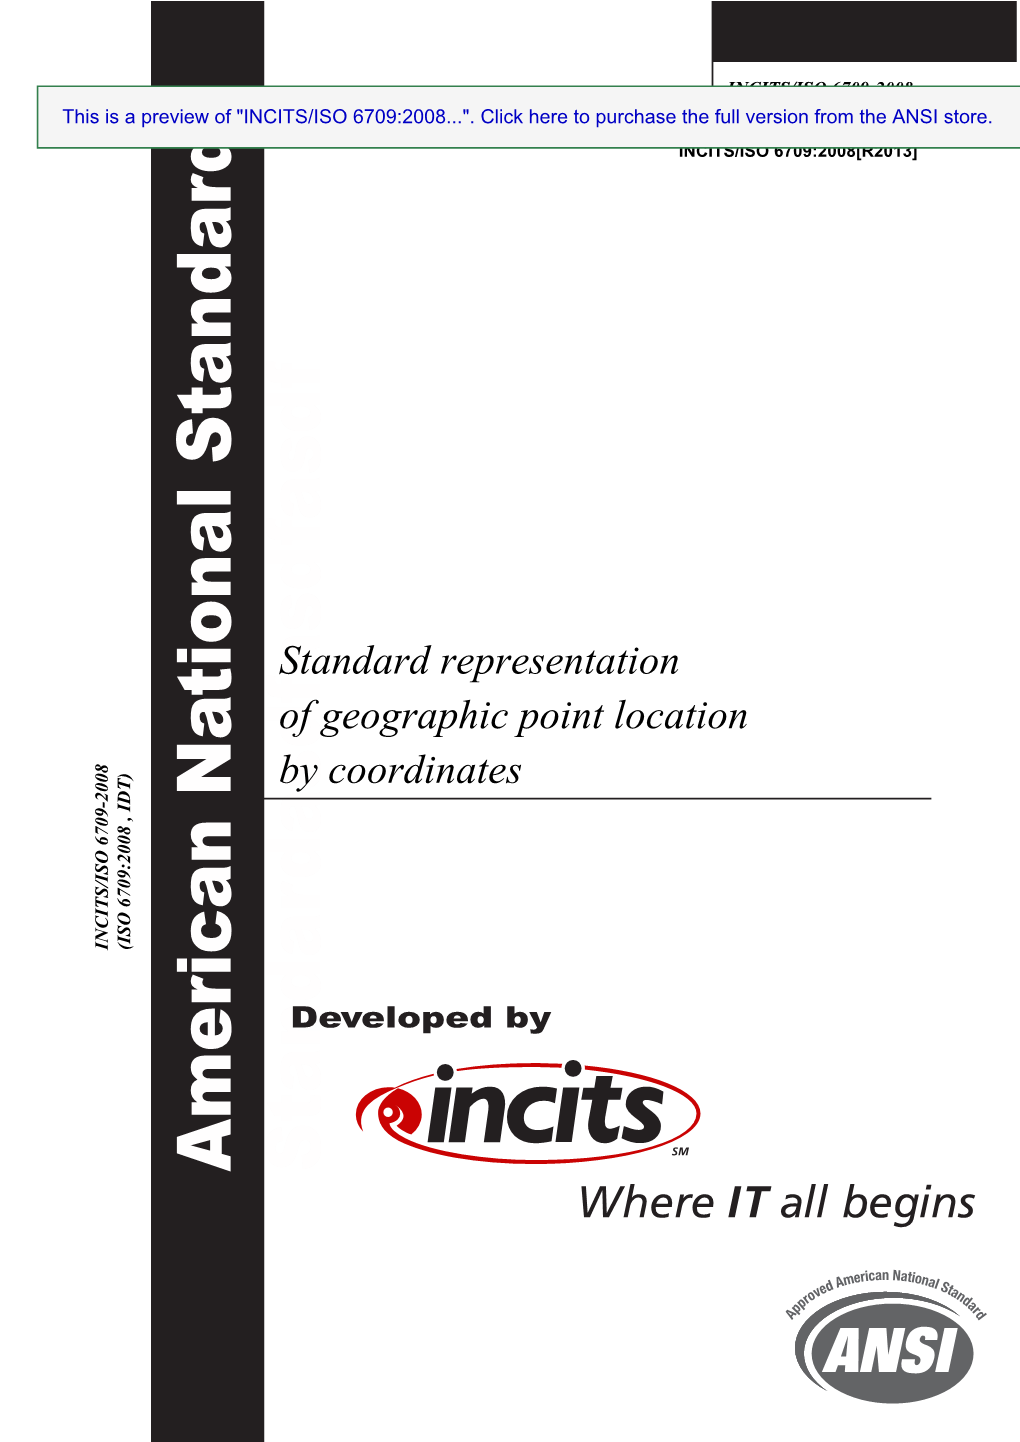 Standard Representation of Geographic Point Location by Coordinates